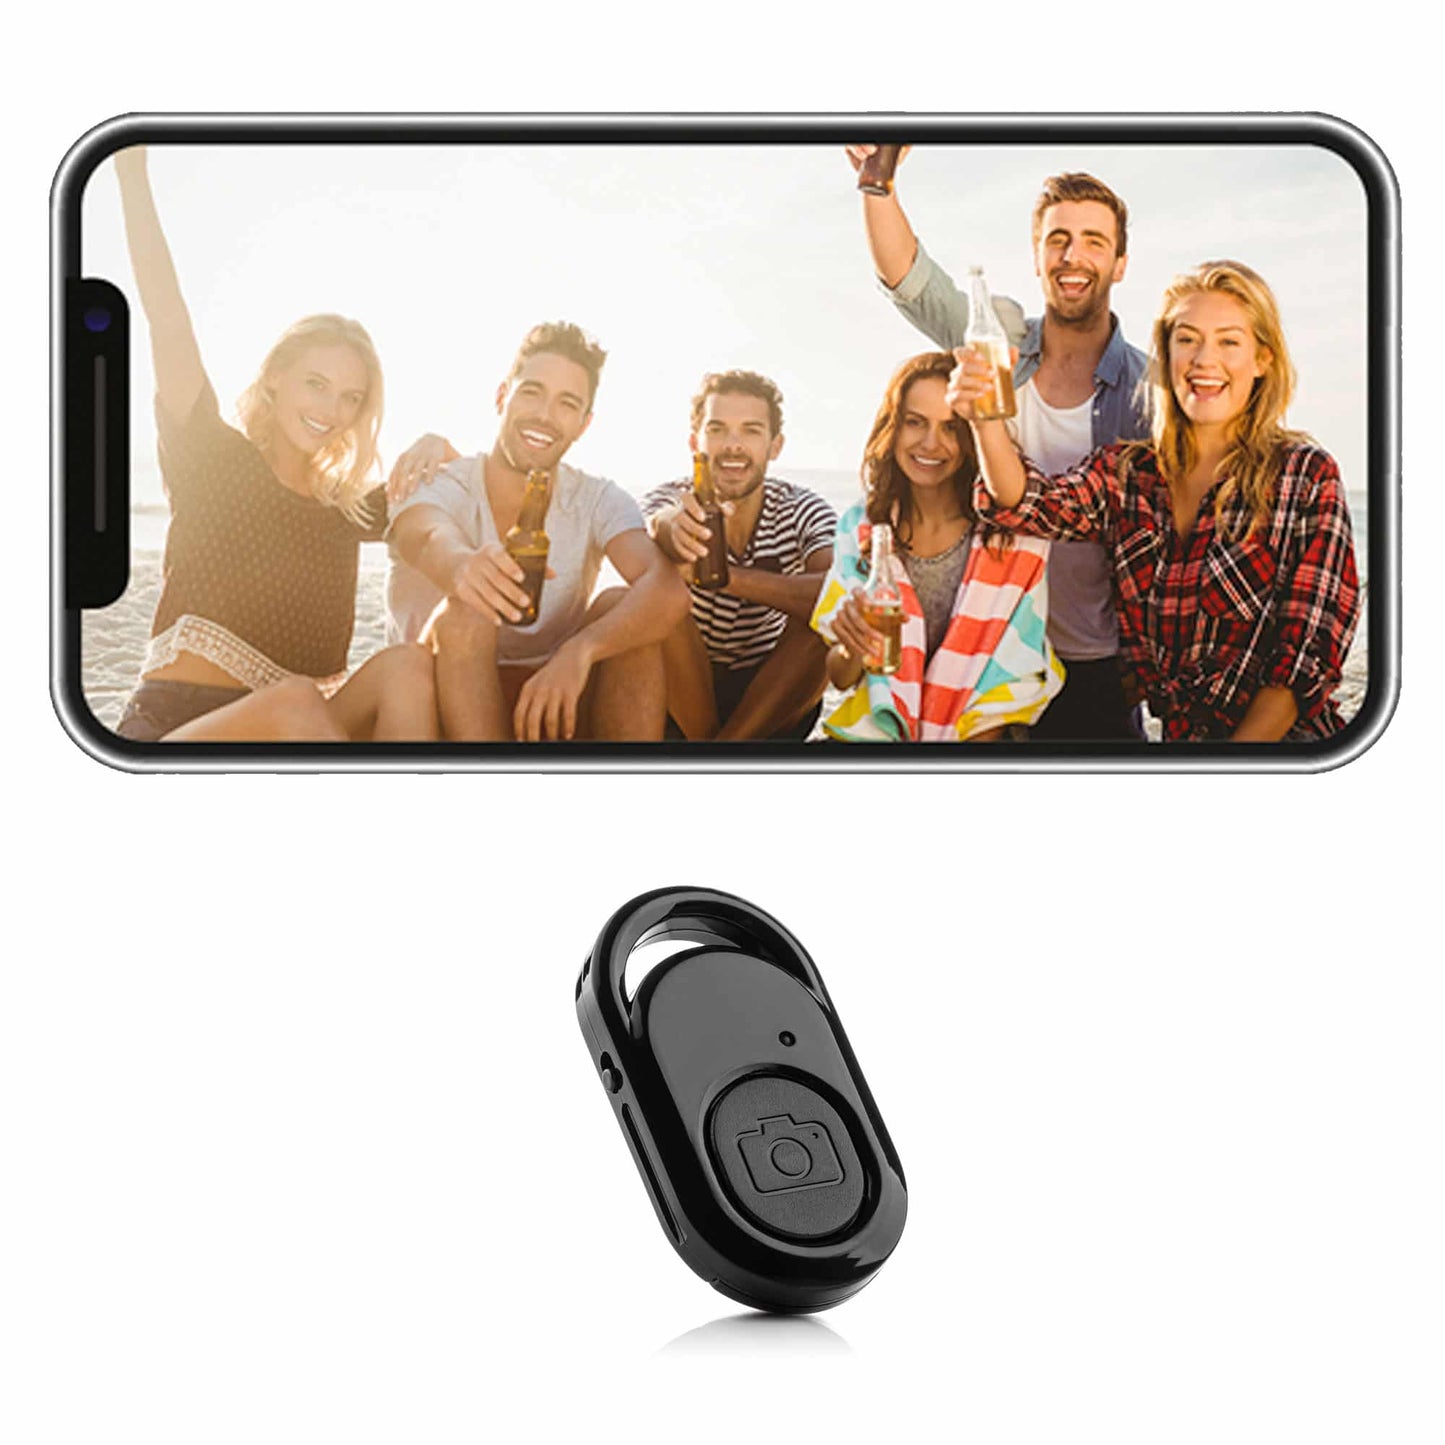 MOJOGEAR Bluetooth remote shutter remote control for smartphone camera - Robust - Black